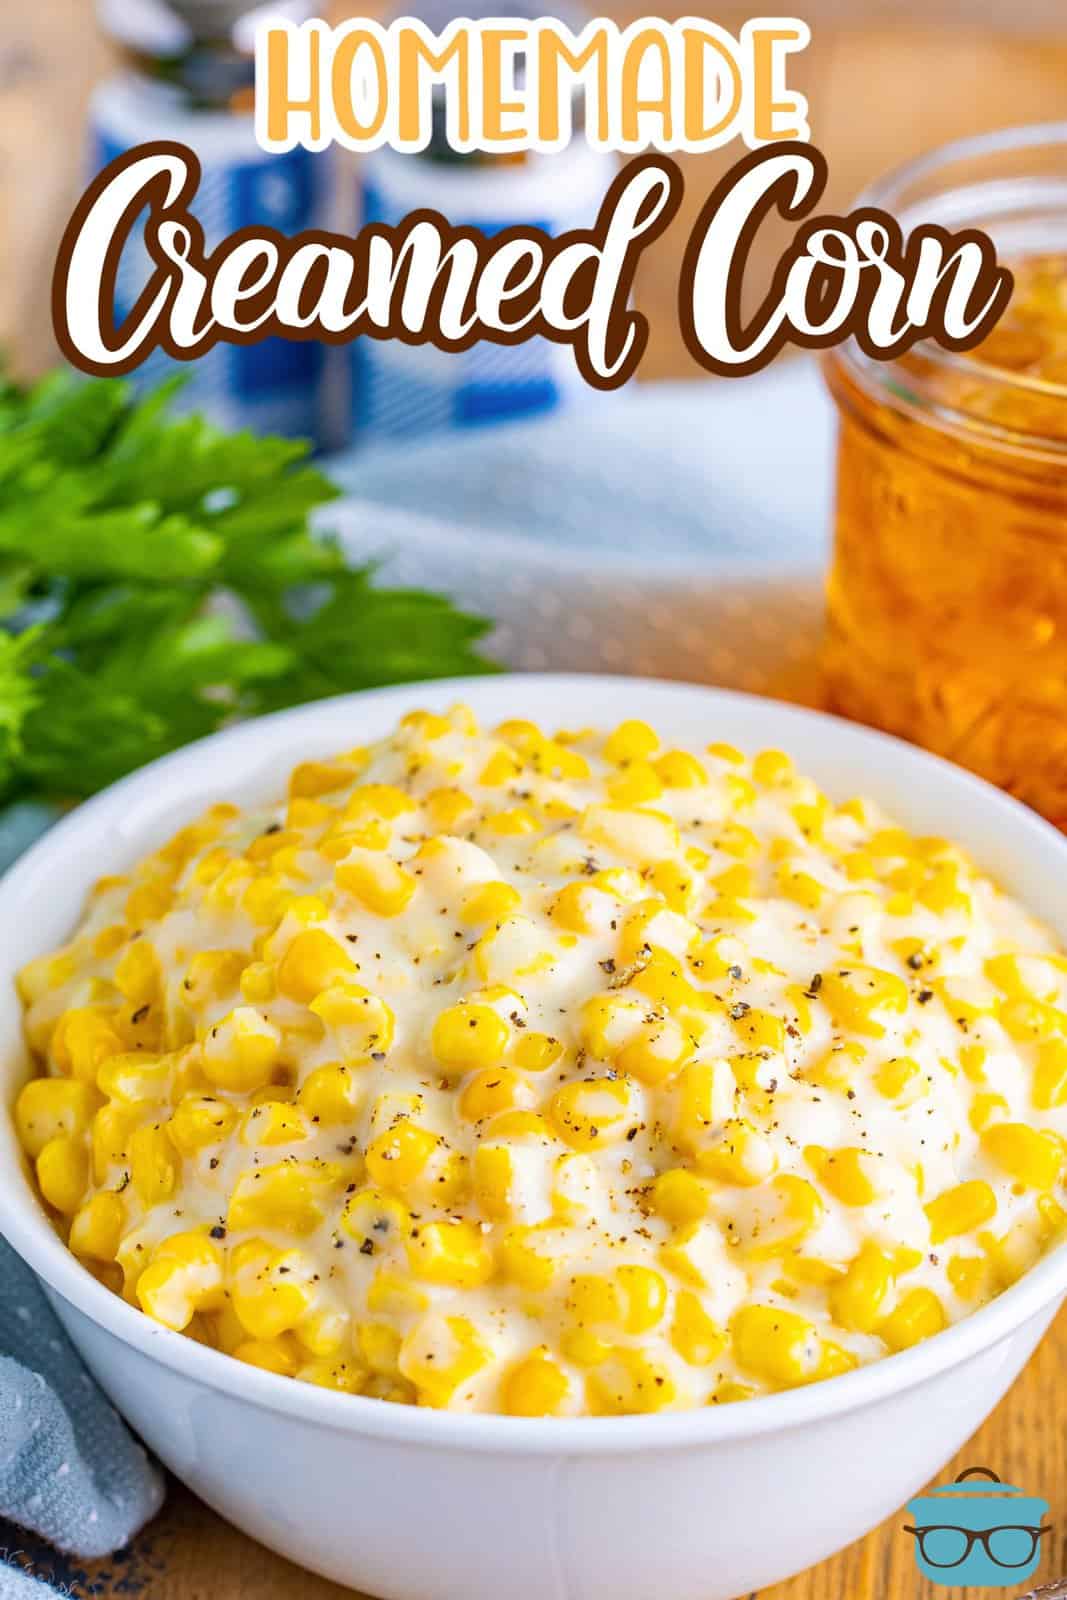 A serving bowl of Creamed Corn.